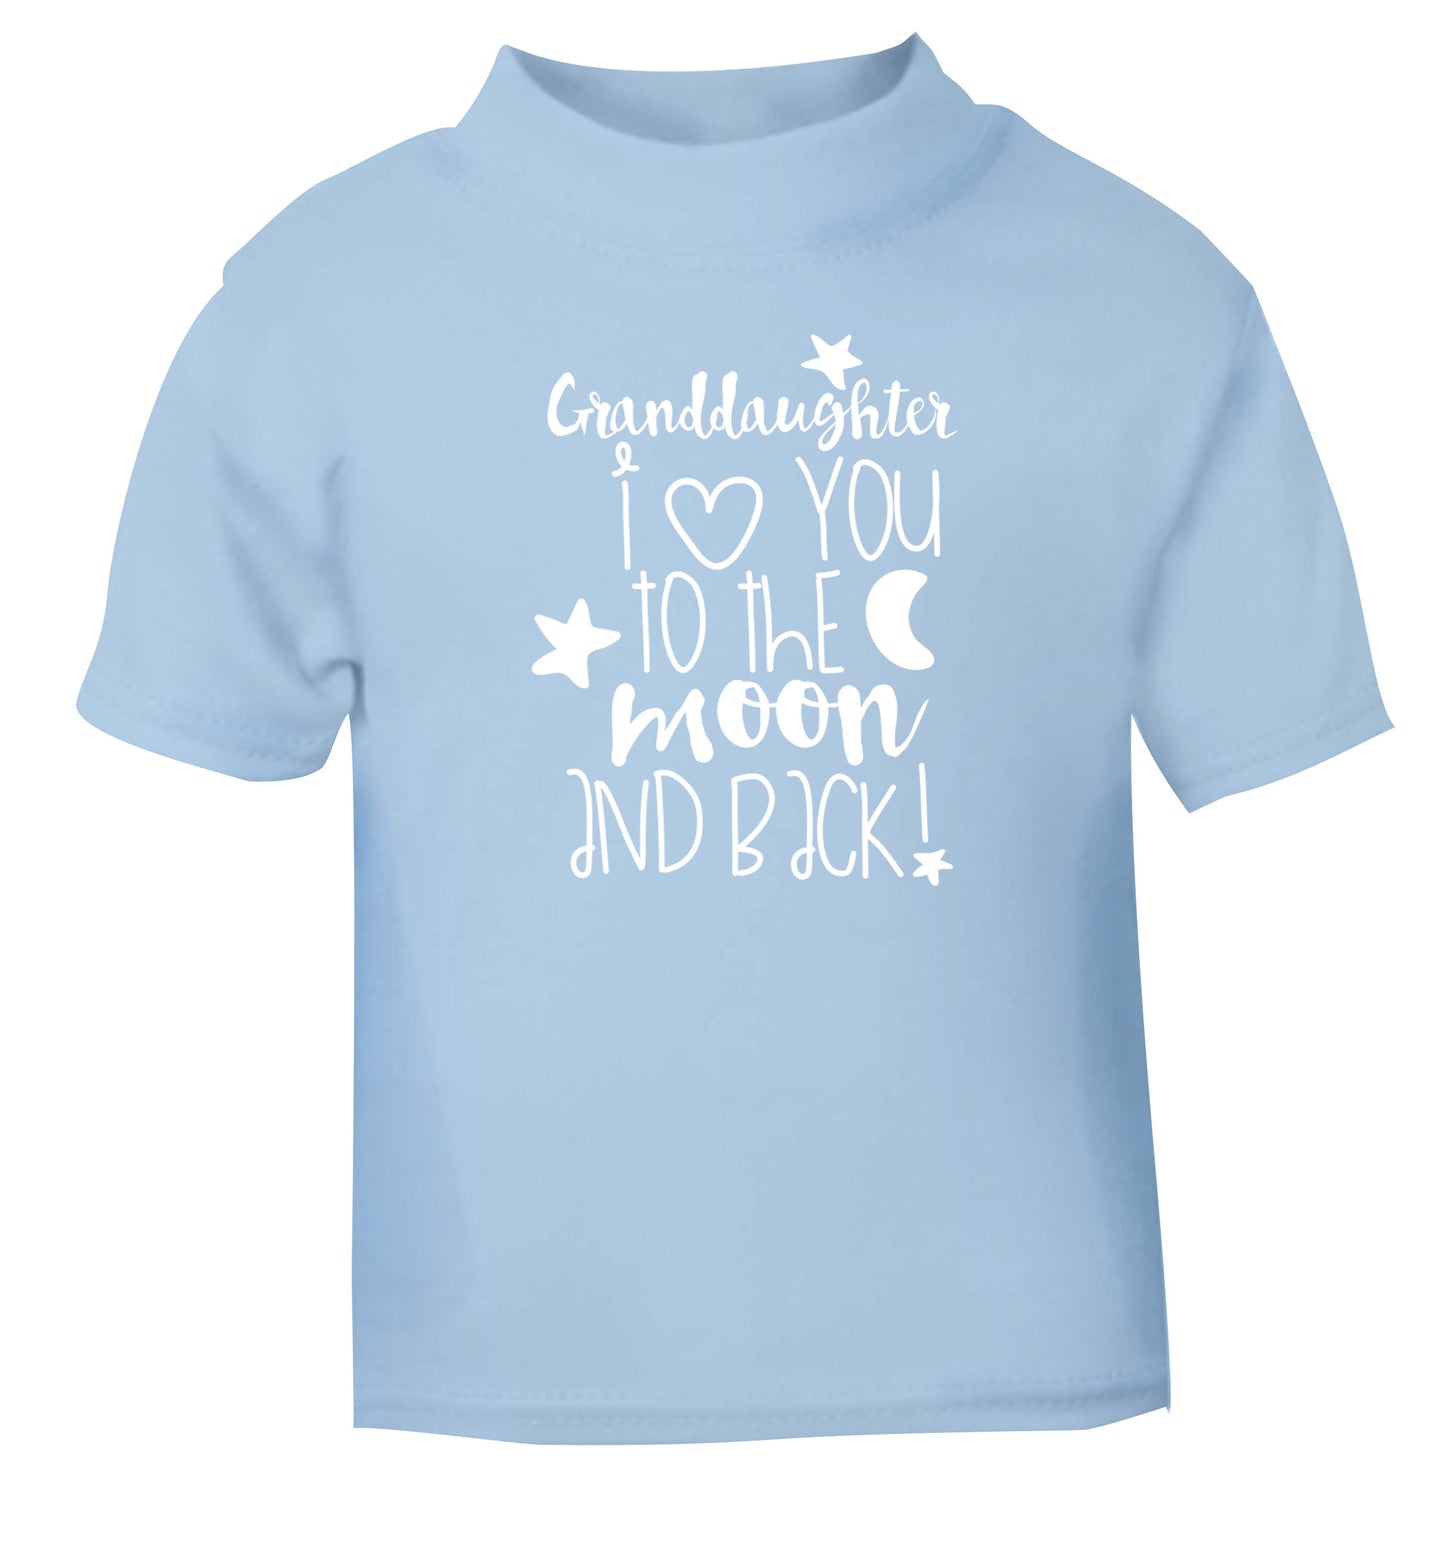 Granddaughter I love you to the moon and back light blue Baby Toddler Tshirt 2 Years